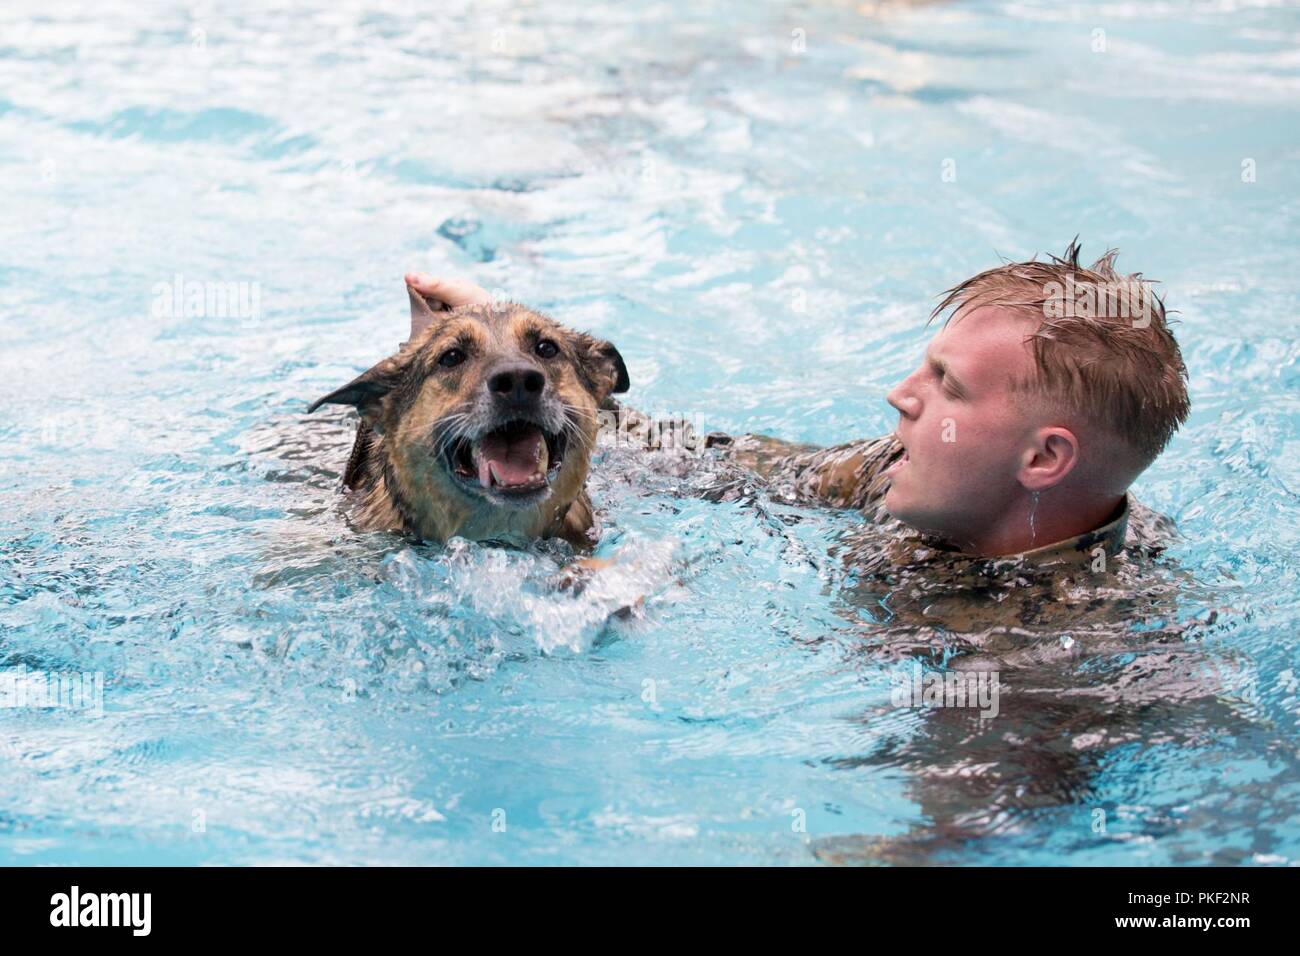 Sergeant Colton Corsetti, a 2nd Law Enforcement Battalion military working dog-handler, shouts commands at his dog, Atilla, as they swim in the Area 5 pool at Marine Corps Base Camp Lejeune, N.C., Aug. 3, 2018. 2nd LEB practiced aggression training as part of specialized training to familiarize their dogs with water. The 2nd LEB military working dogs benefit from this particular type of training due to not being exposed to water tactics during initial training periods and become better accustomed to performing duties in atypical situations. Stock Photo